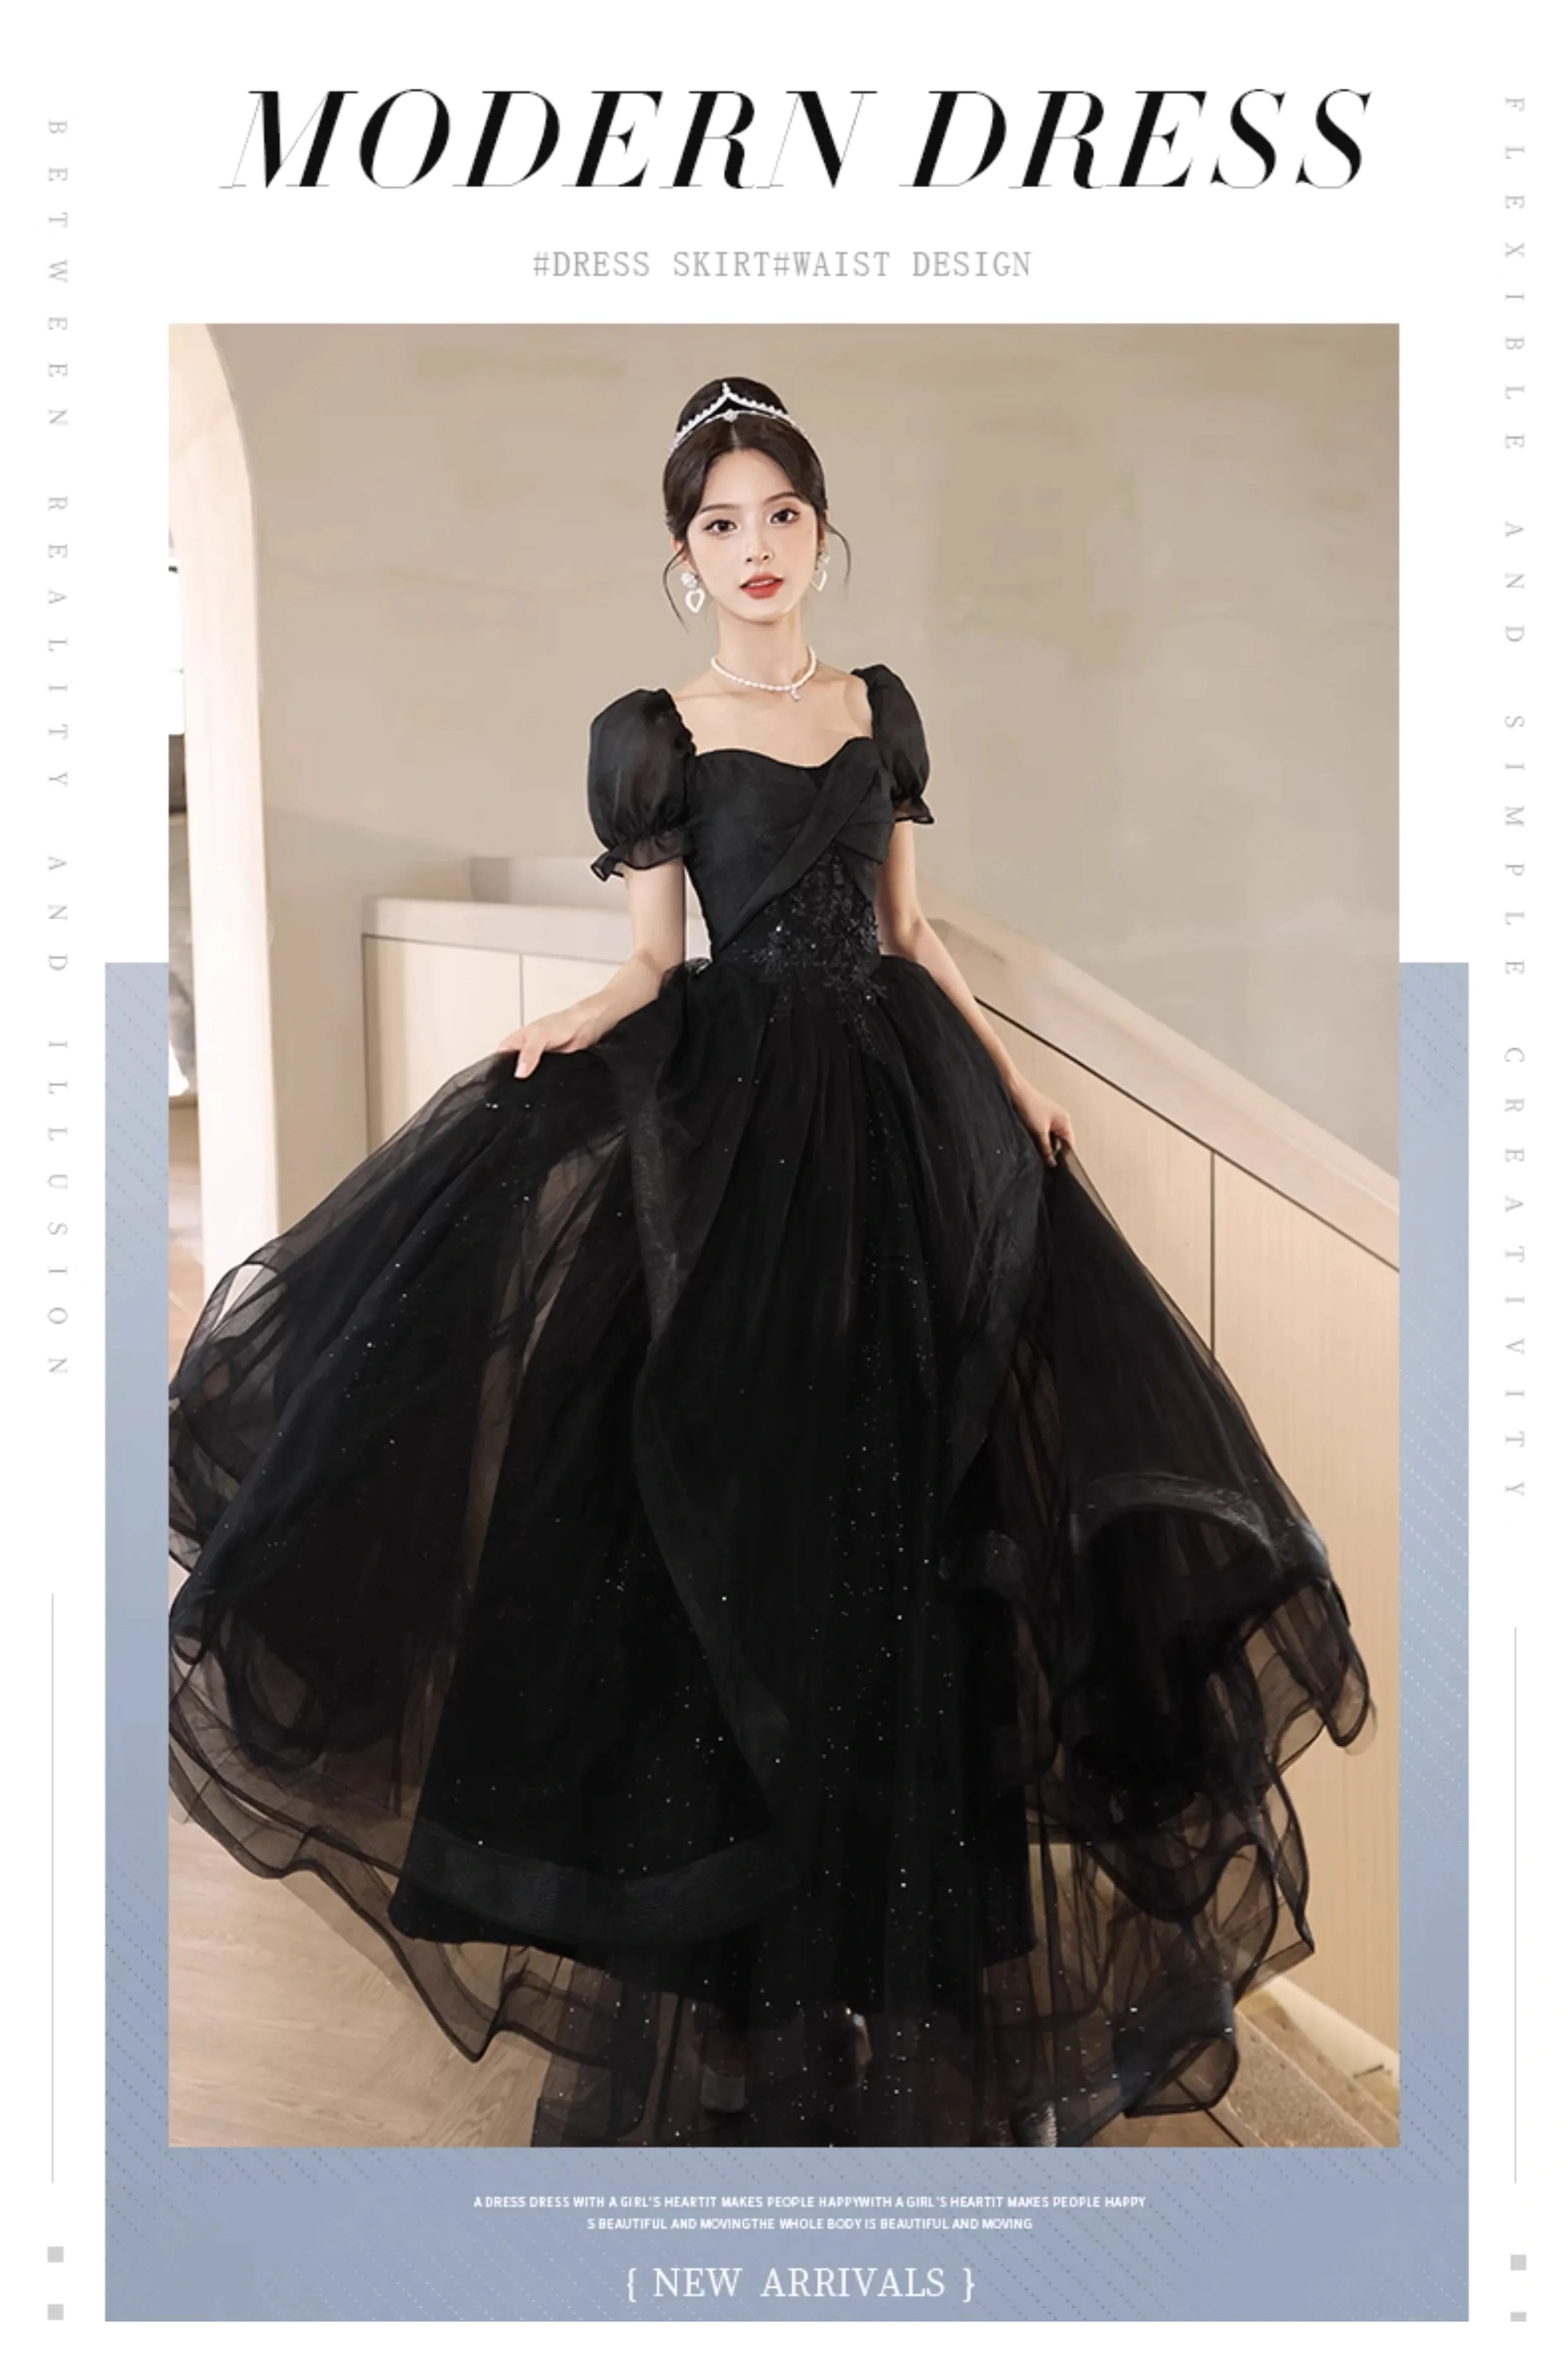 Black-Chiffon-Birthday-Party-Prom-Dress-Cocktail-Evening-Ball-Gown06